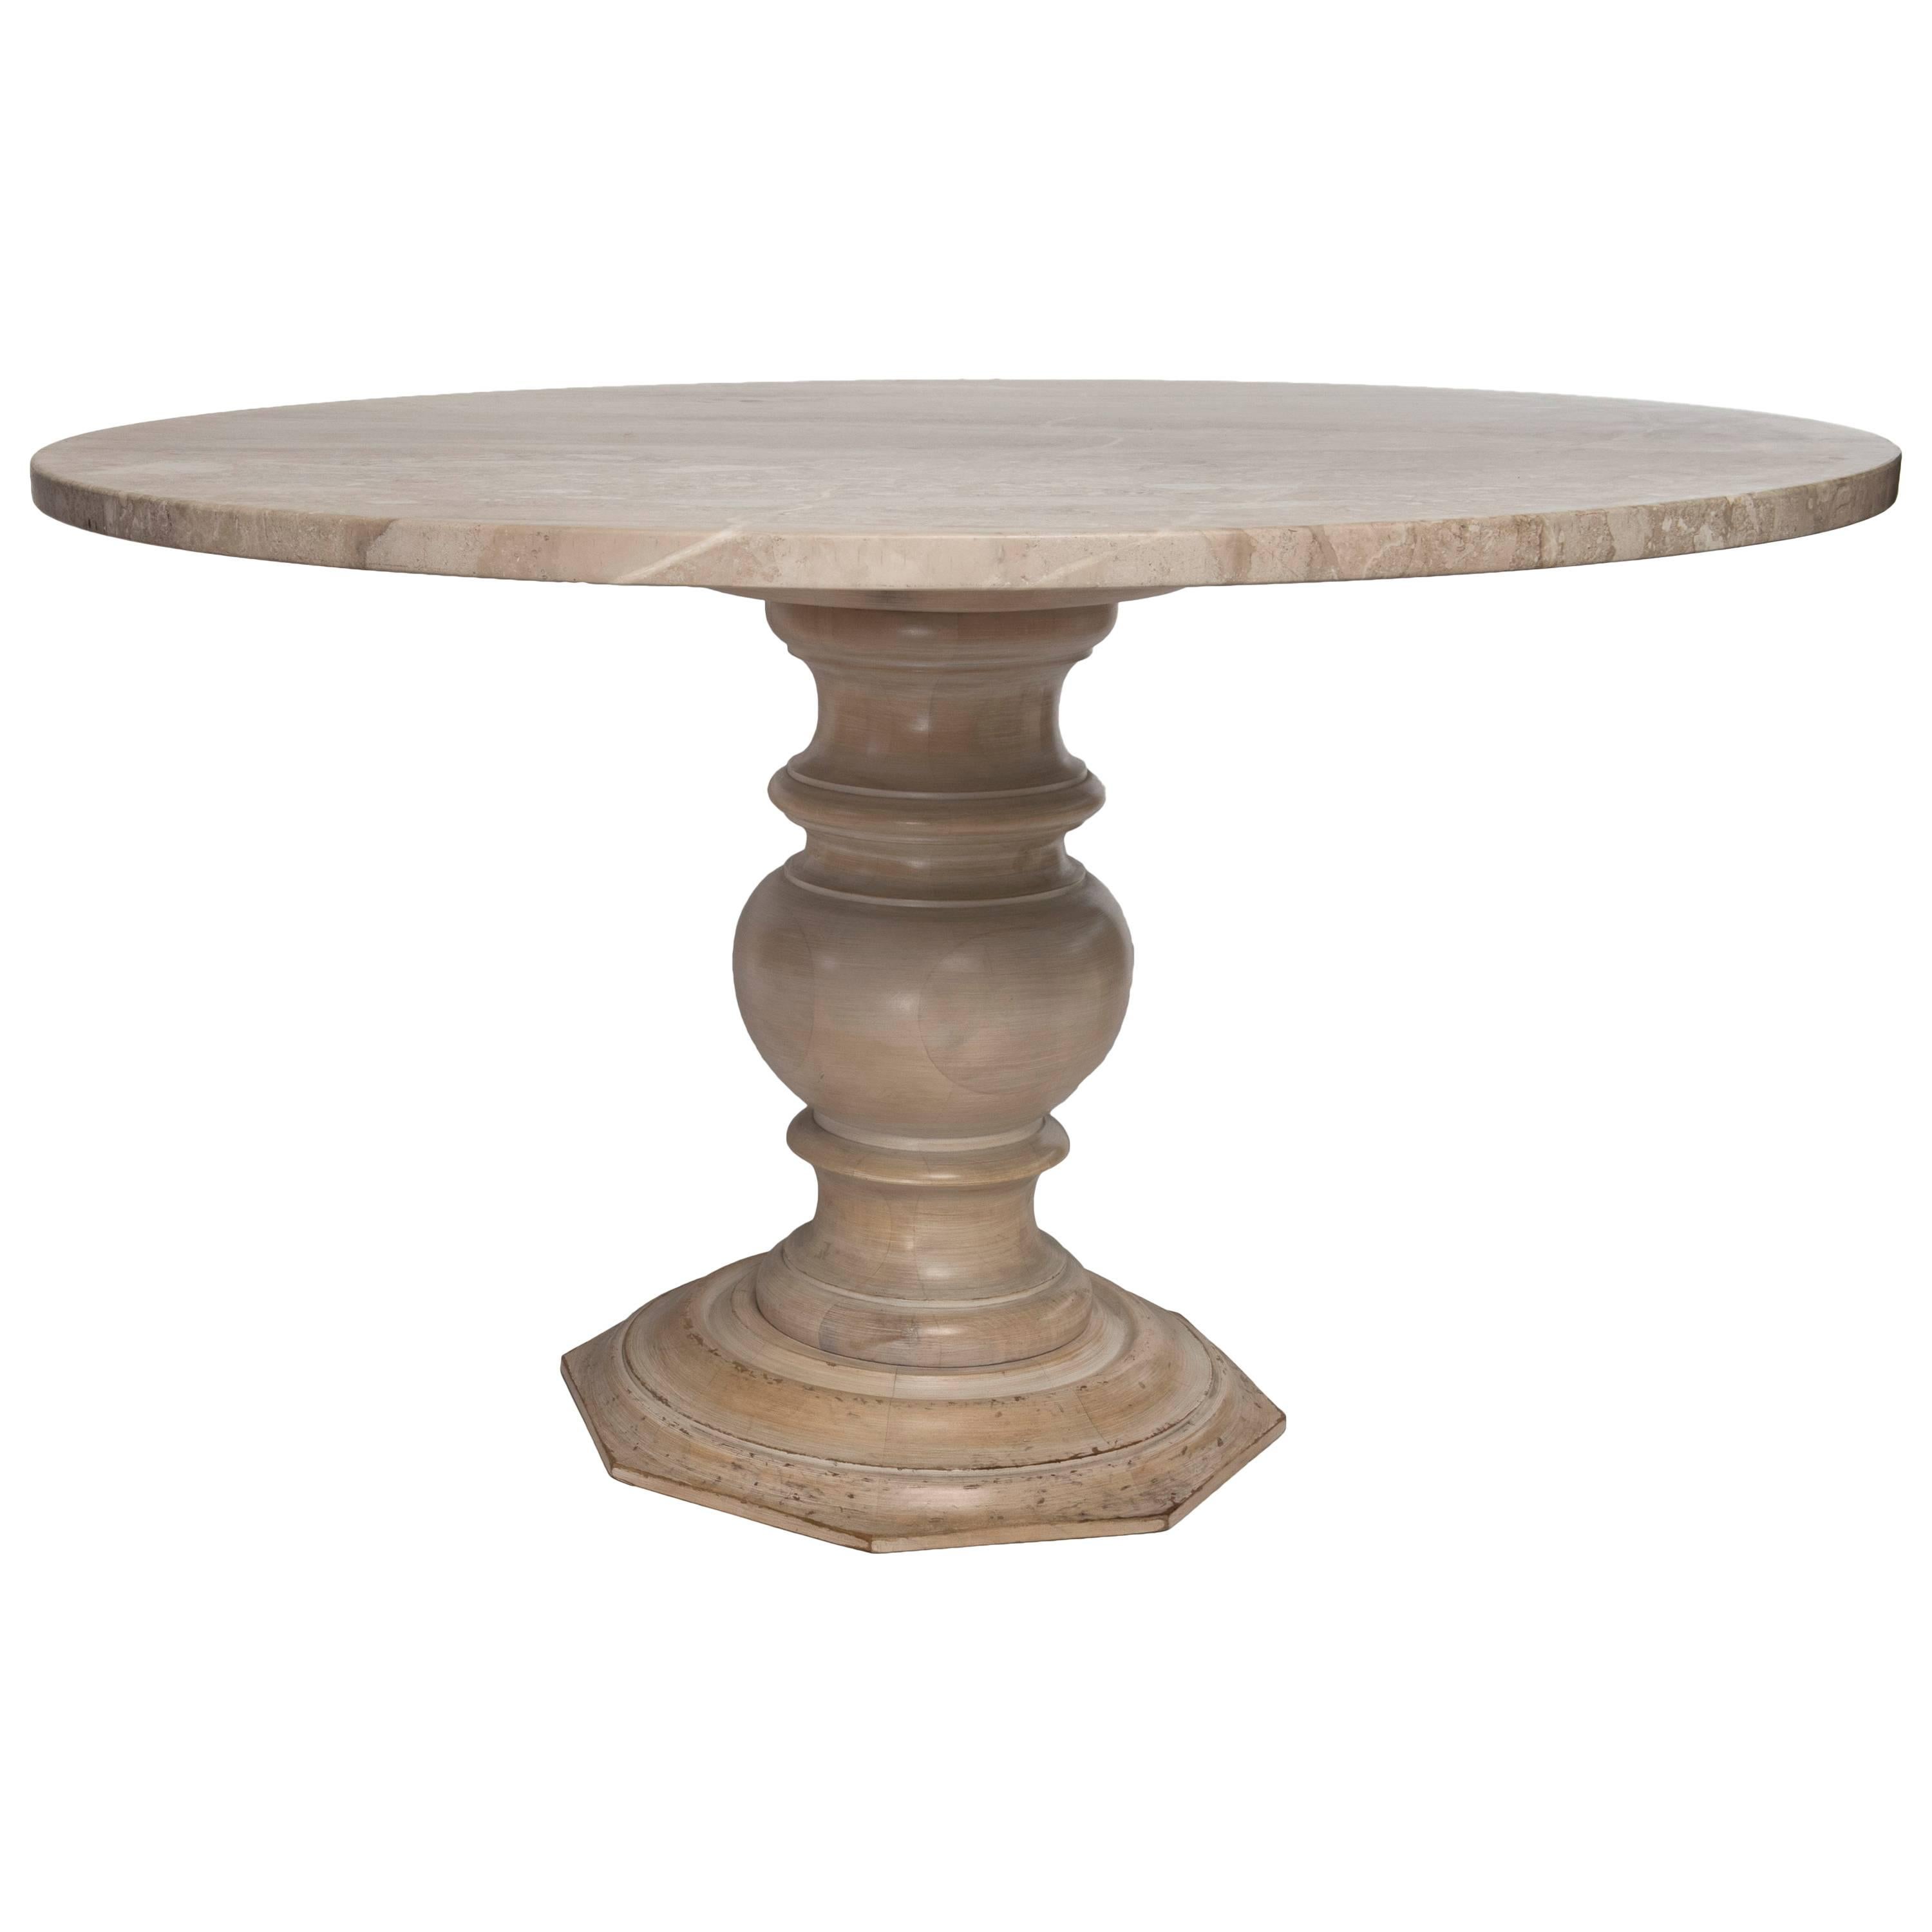 Fruitwood Gueridon Dining Table or Center Table with a New Round Limestone to